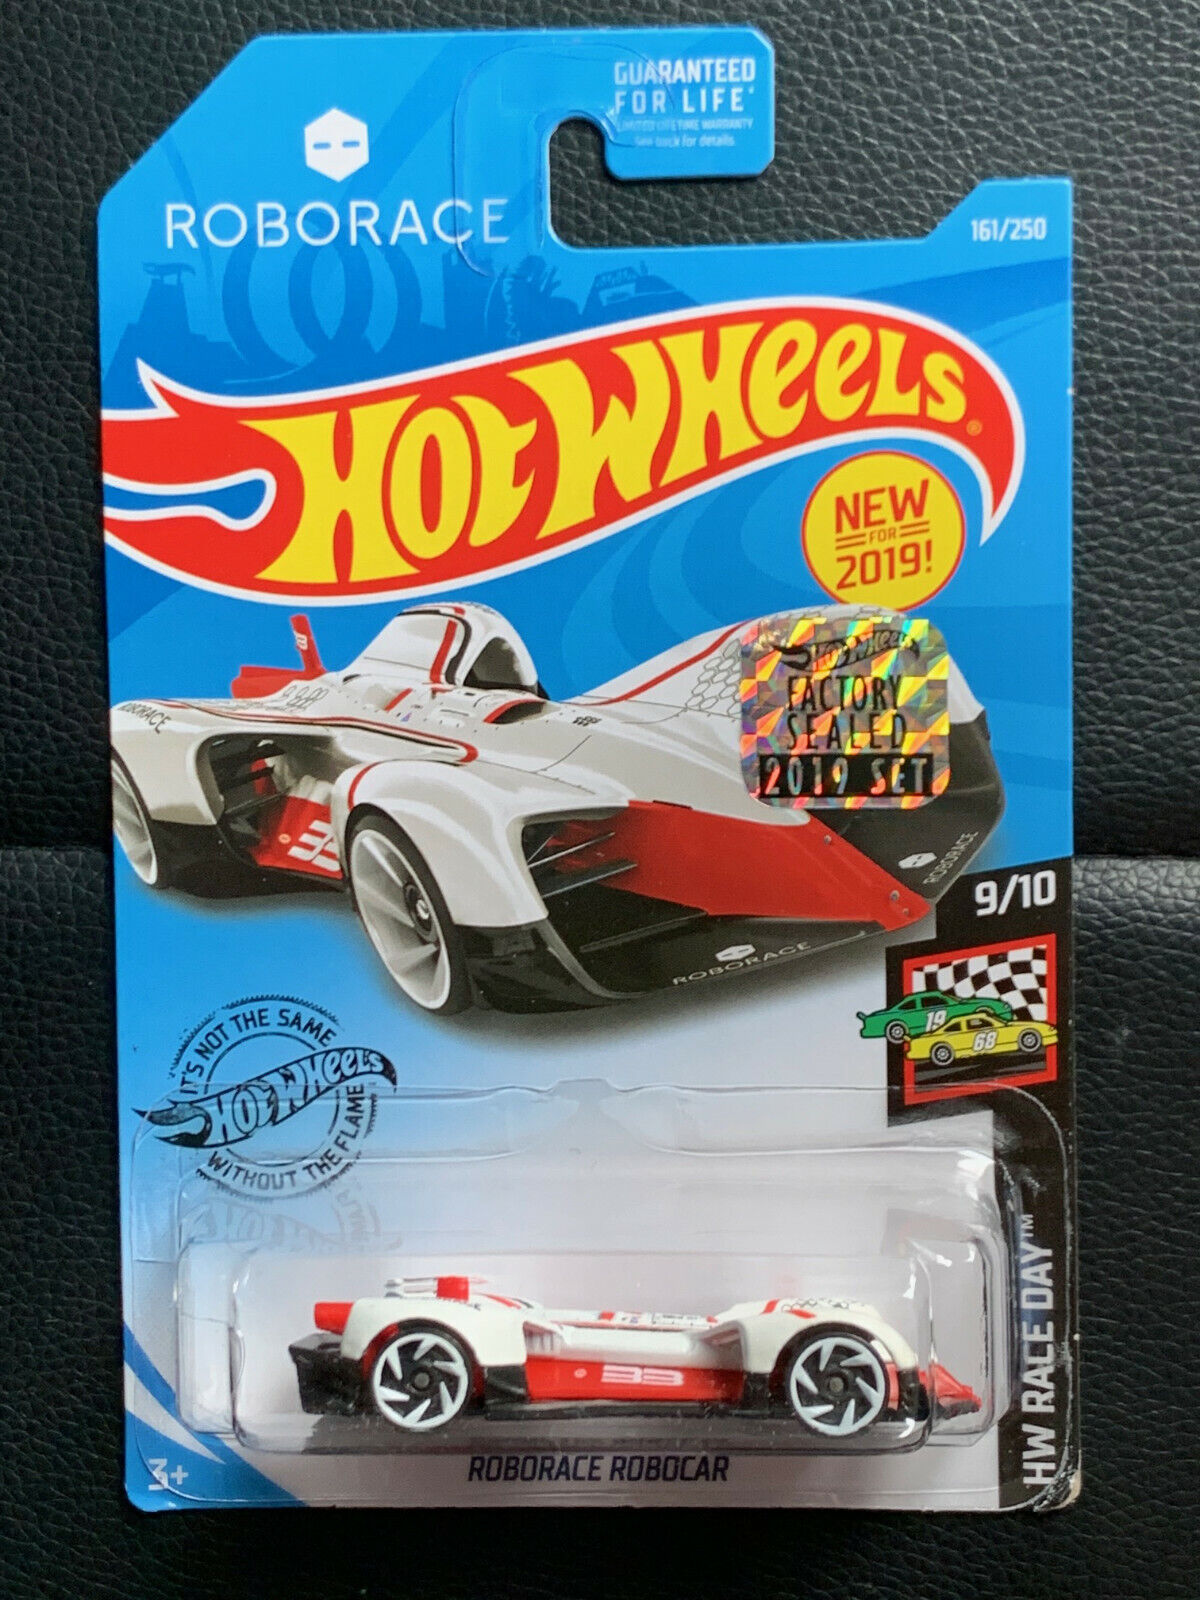 Hot Wheels Roborace Robocar (white/red) 161/250, HW Race Day - Factory Sealed 